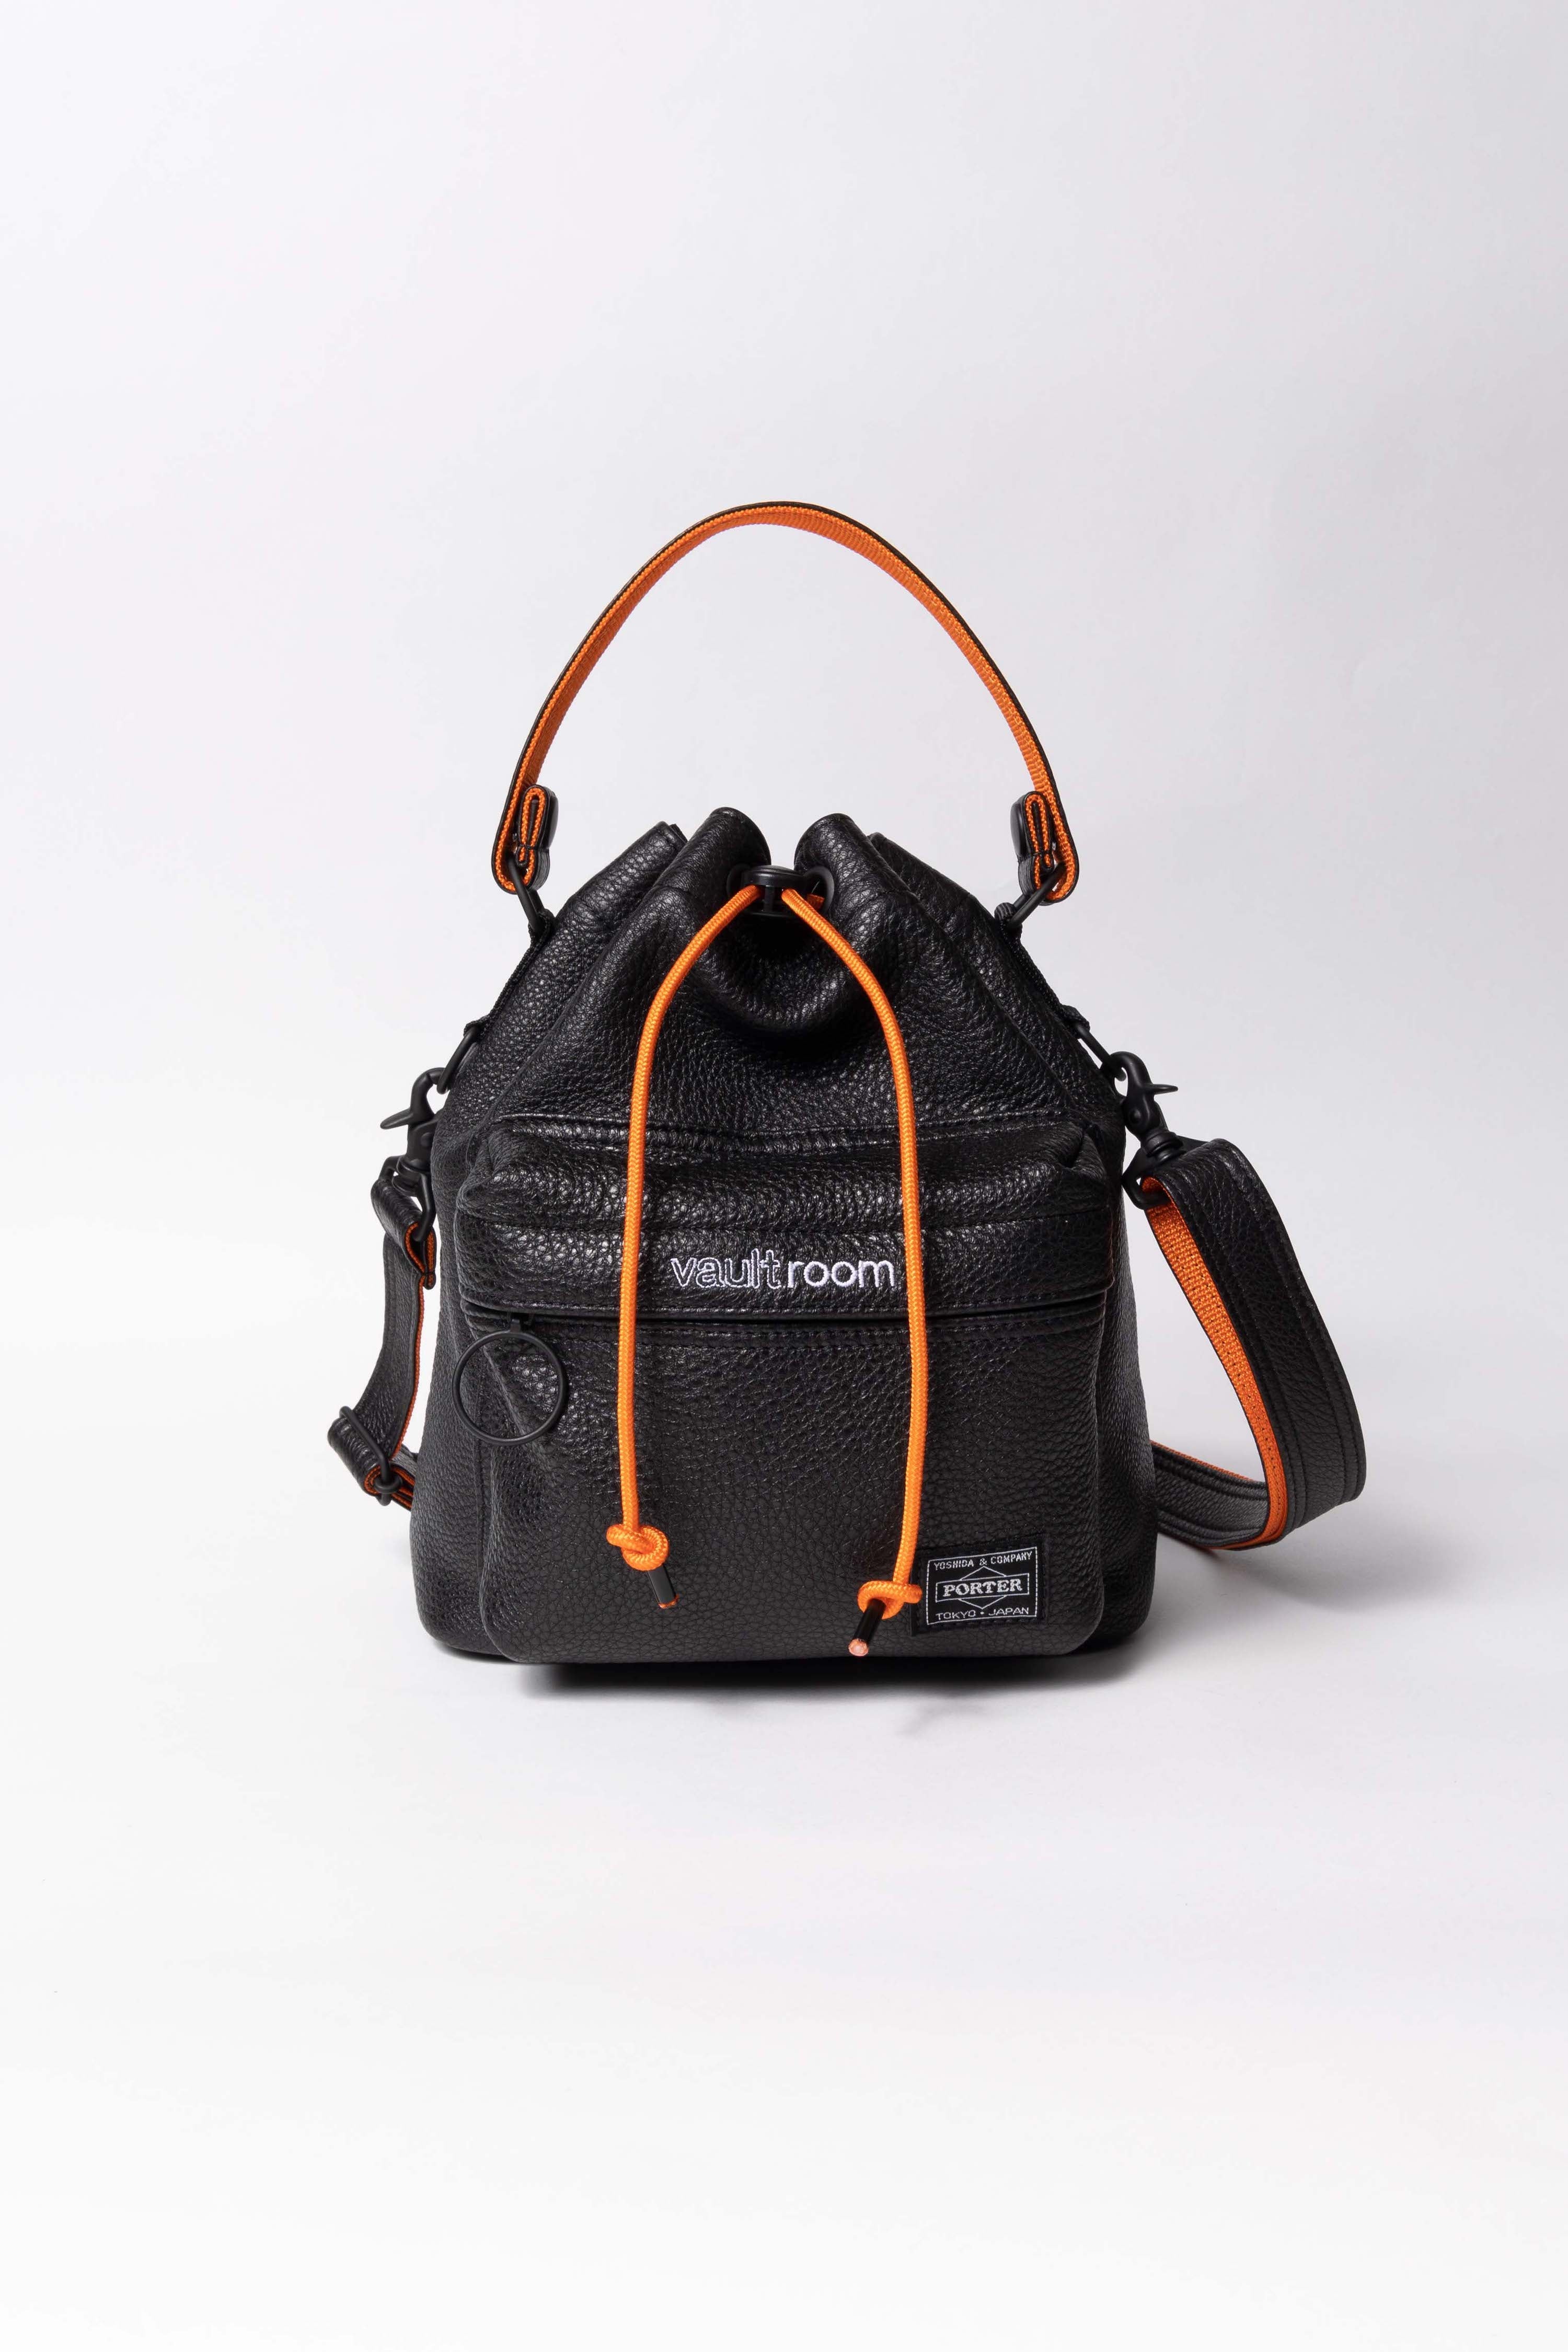 vaultroom×porter leather gaming bag ブラックメンズ